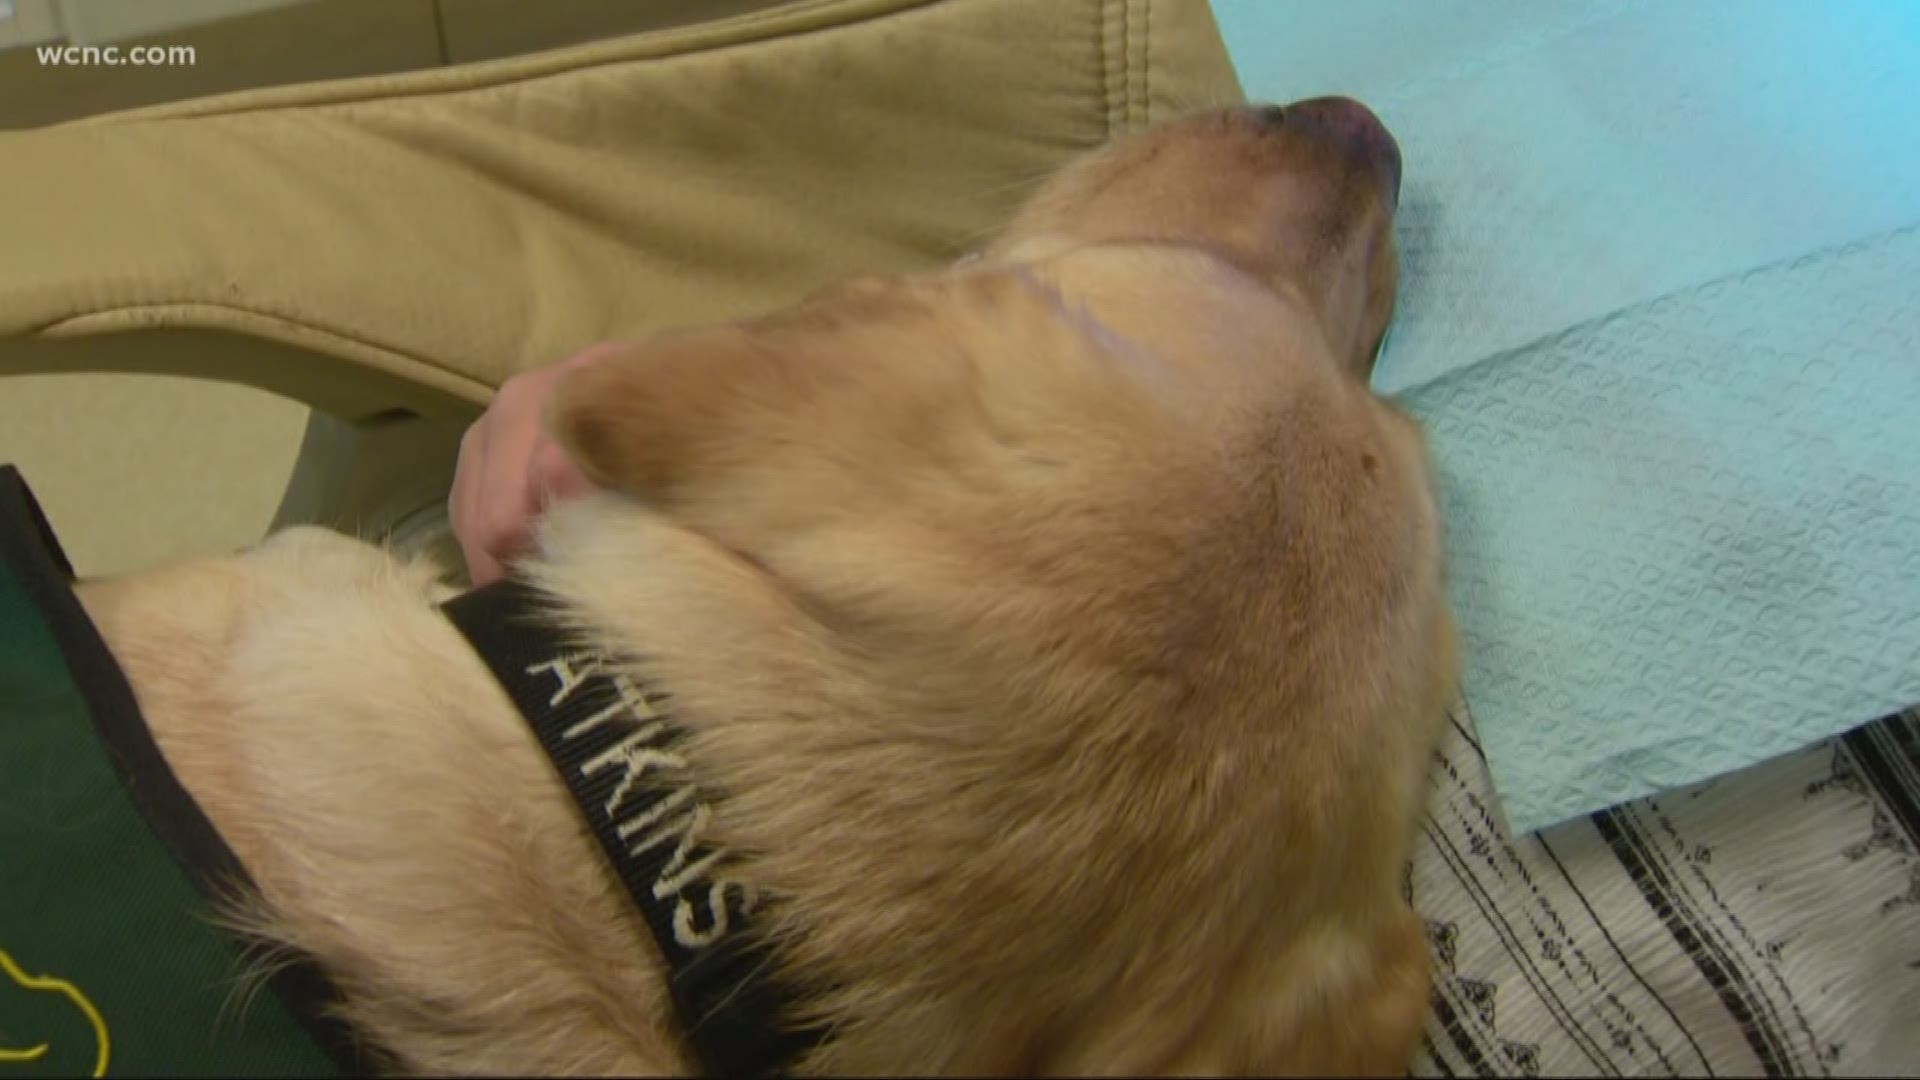 A Harrisburg dentist office is using a service dog to help calm kids fears while at the dentist.